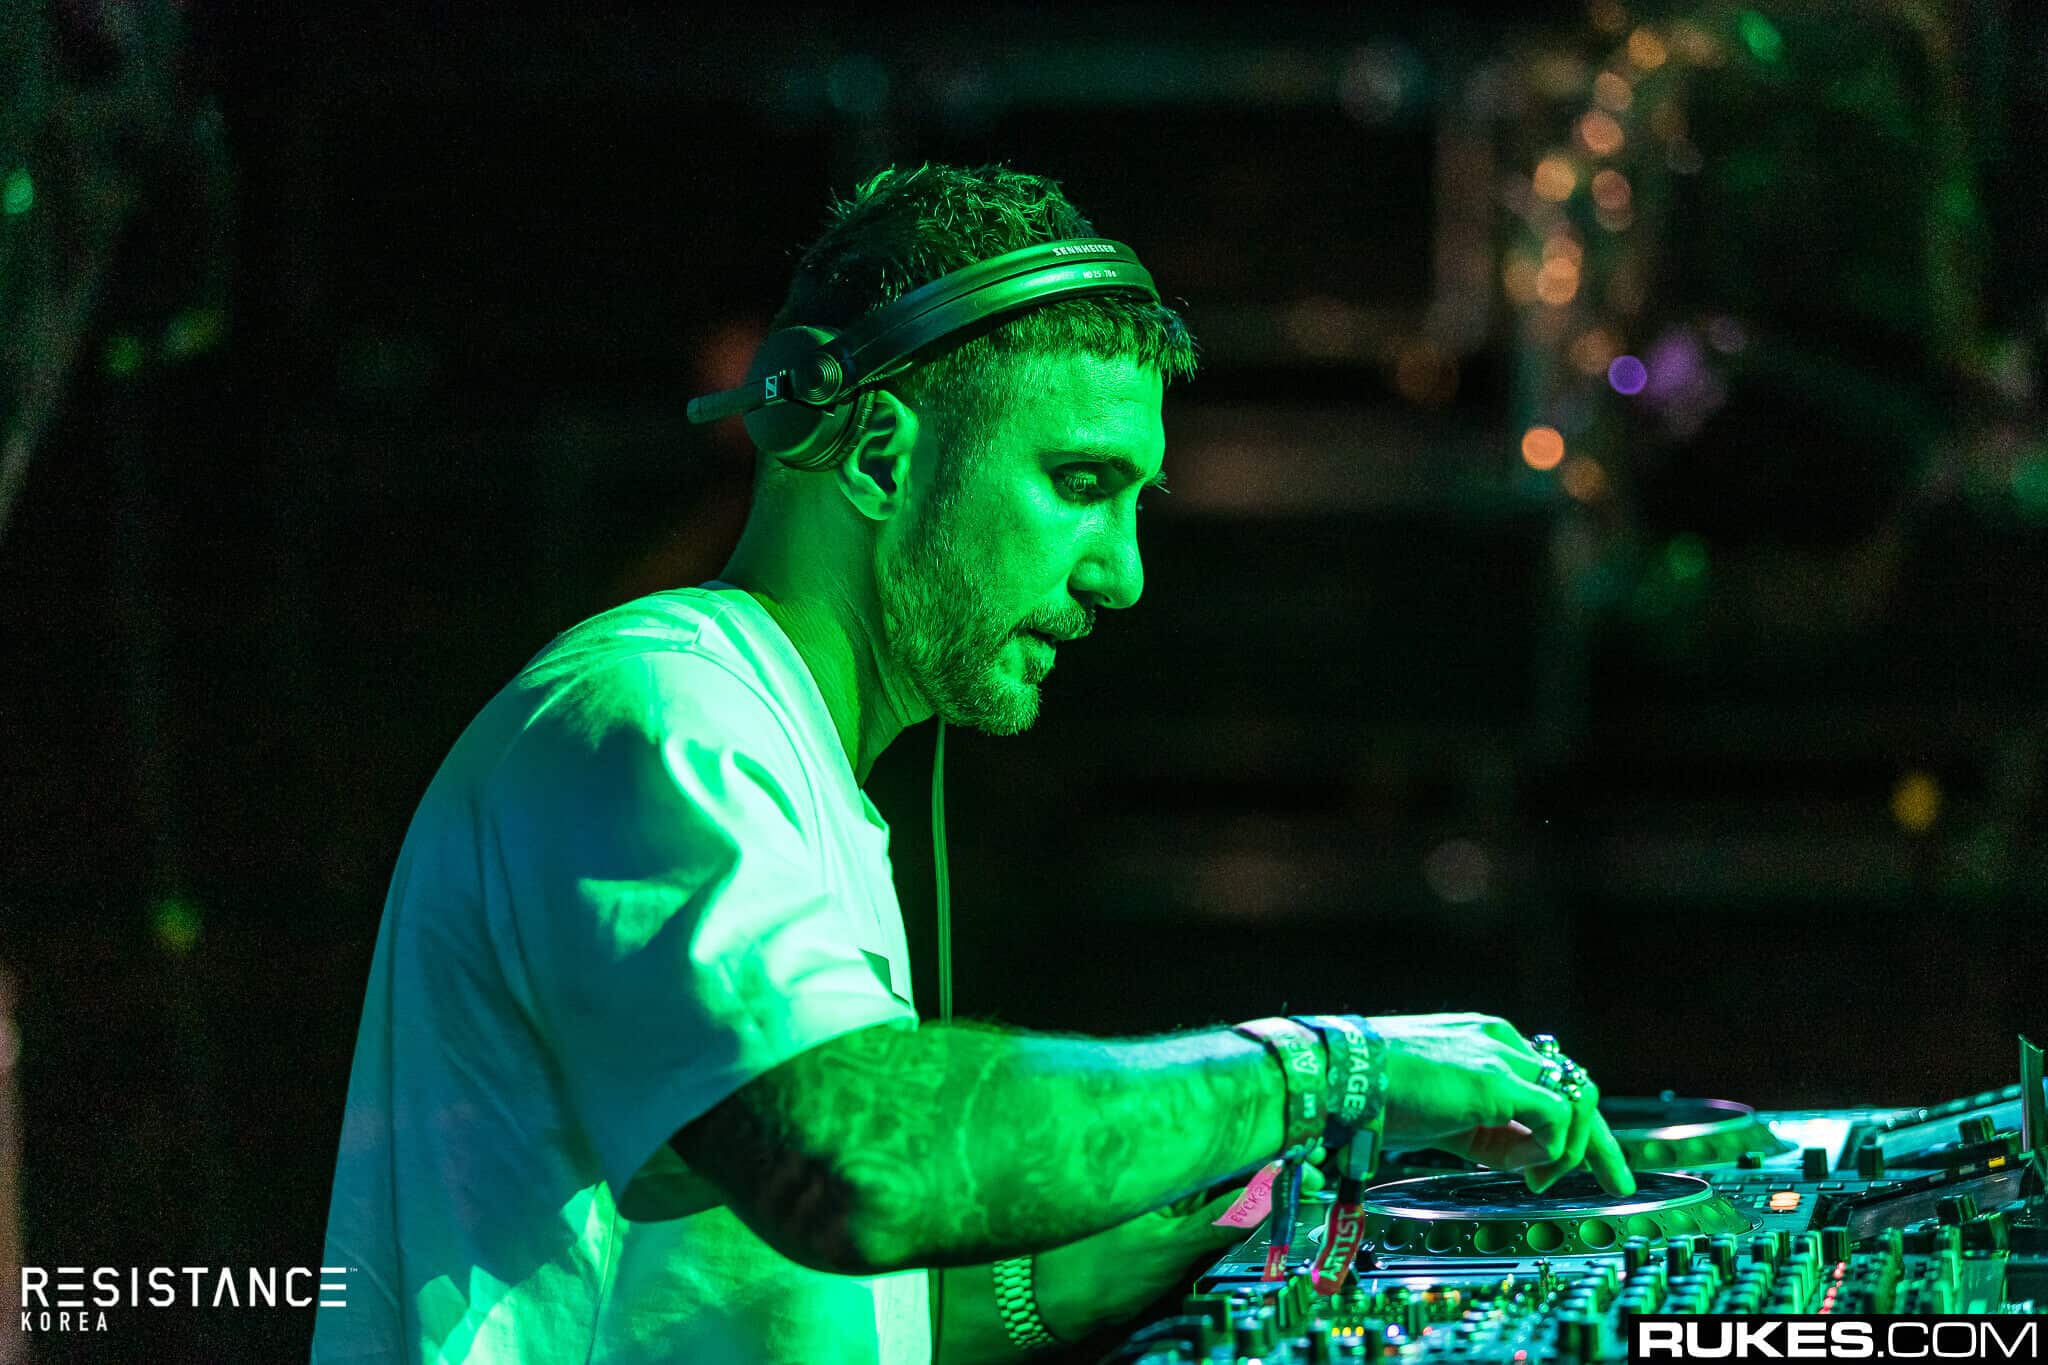 Hot Since 82 & Ron Carroll deliver all the right vibes with ‘Preach’:Listen